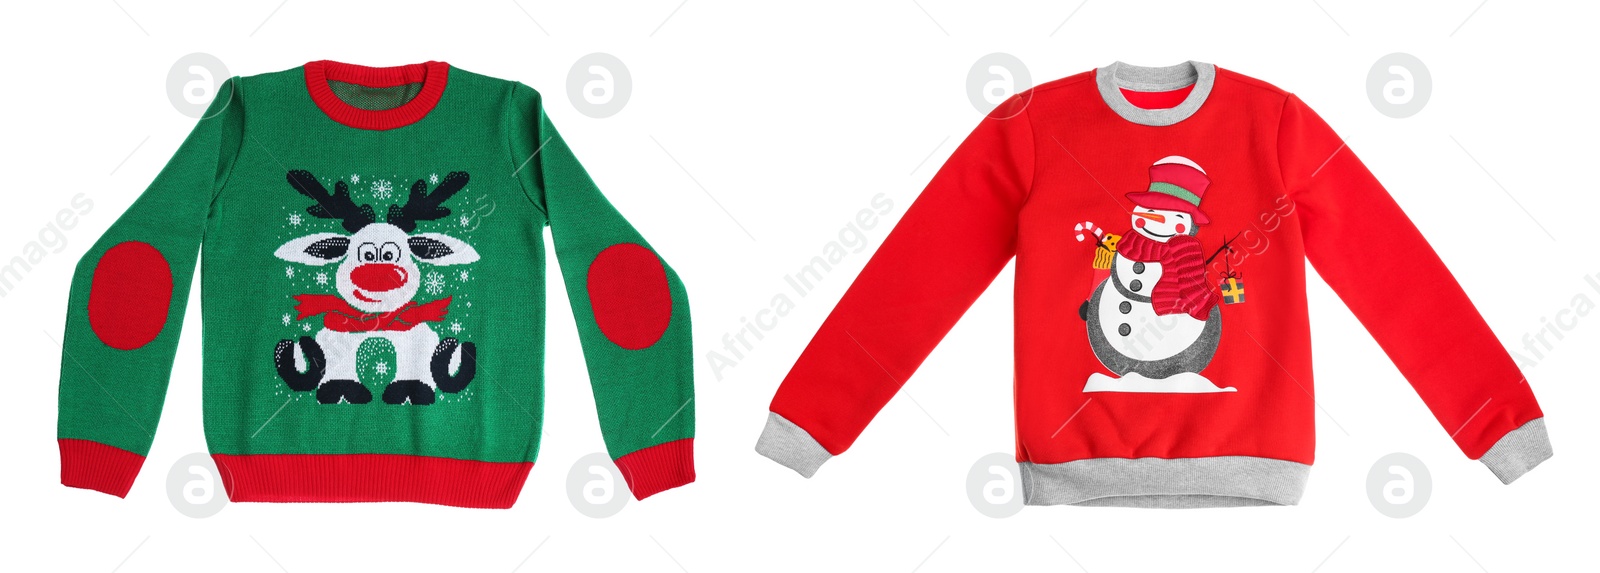 Image of Red and green Christmas sweaters on white background